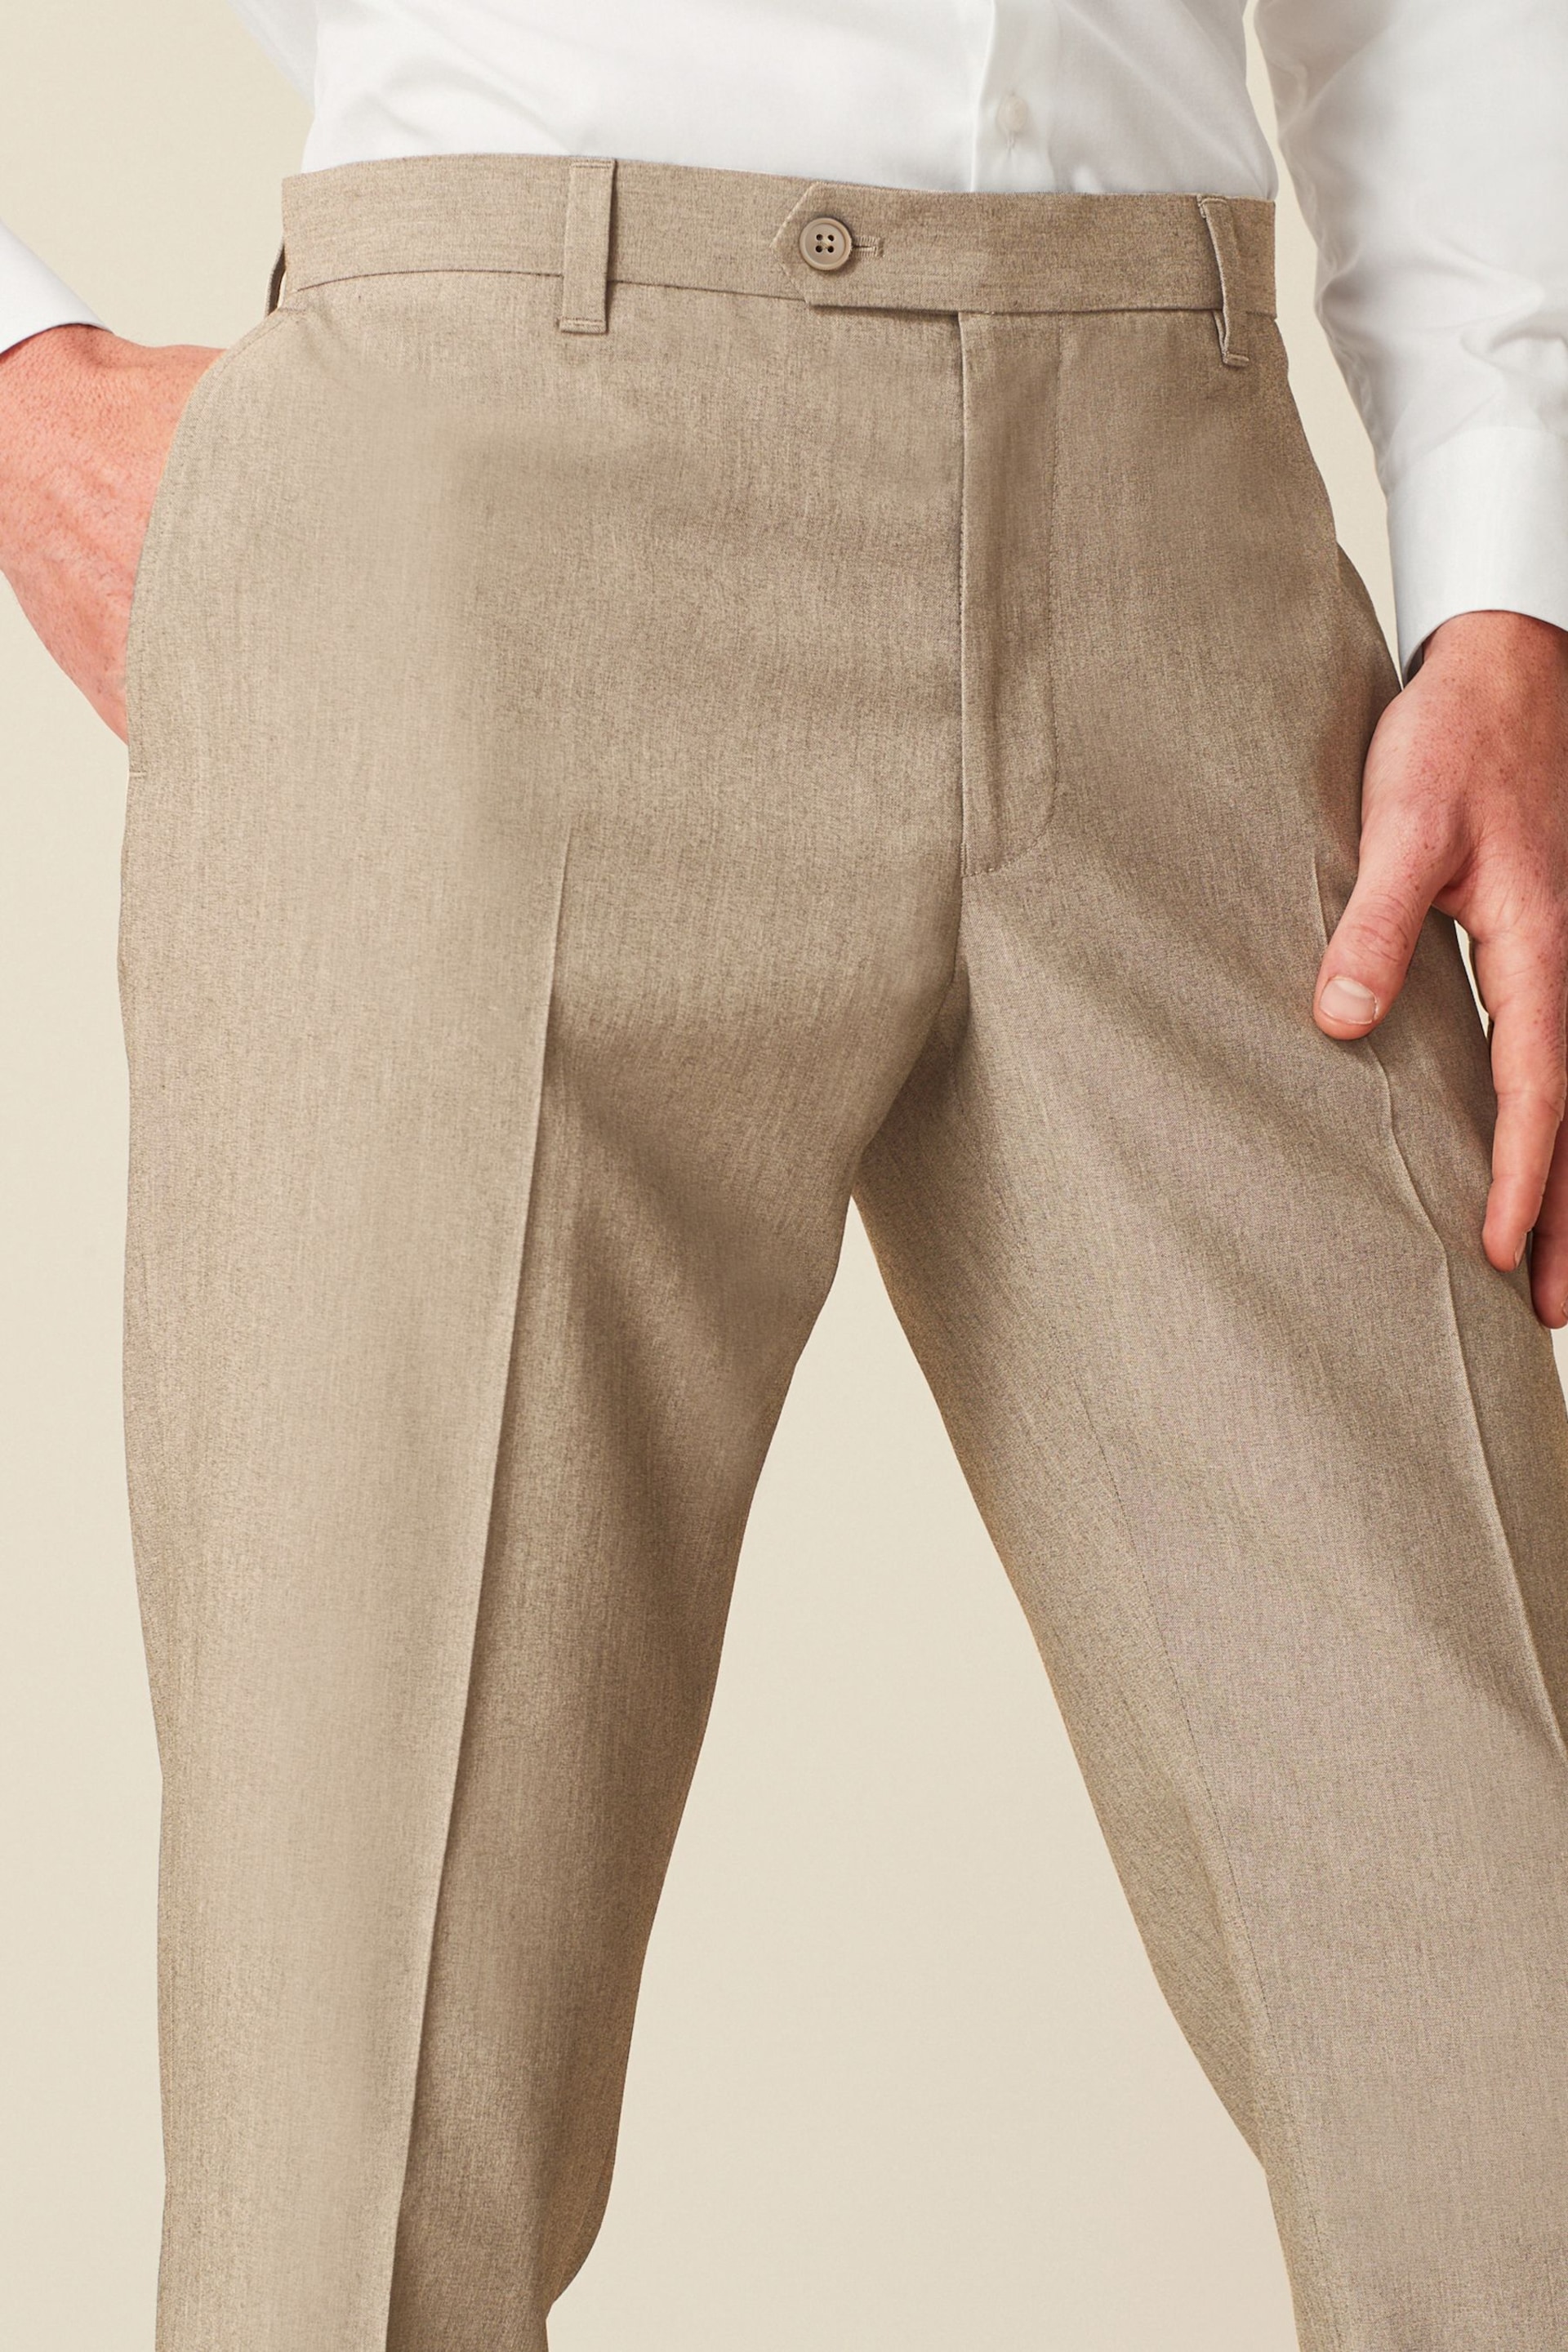 Stone Slim Stretch Smart Trousers - Image 4 of 8